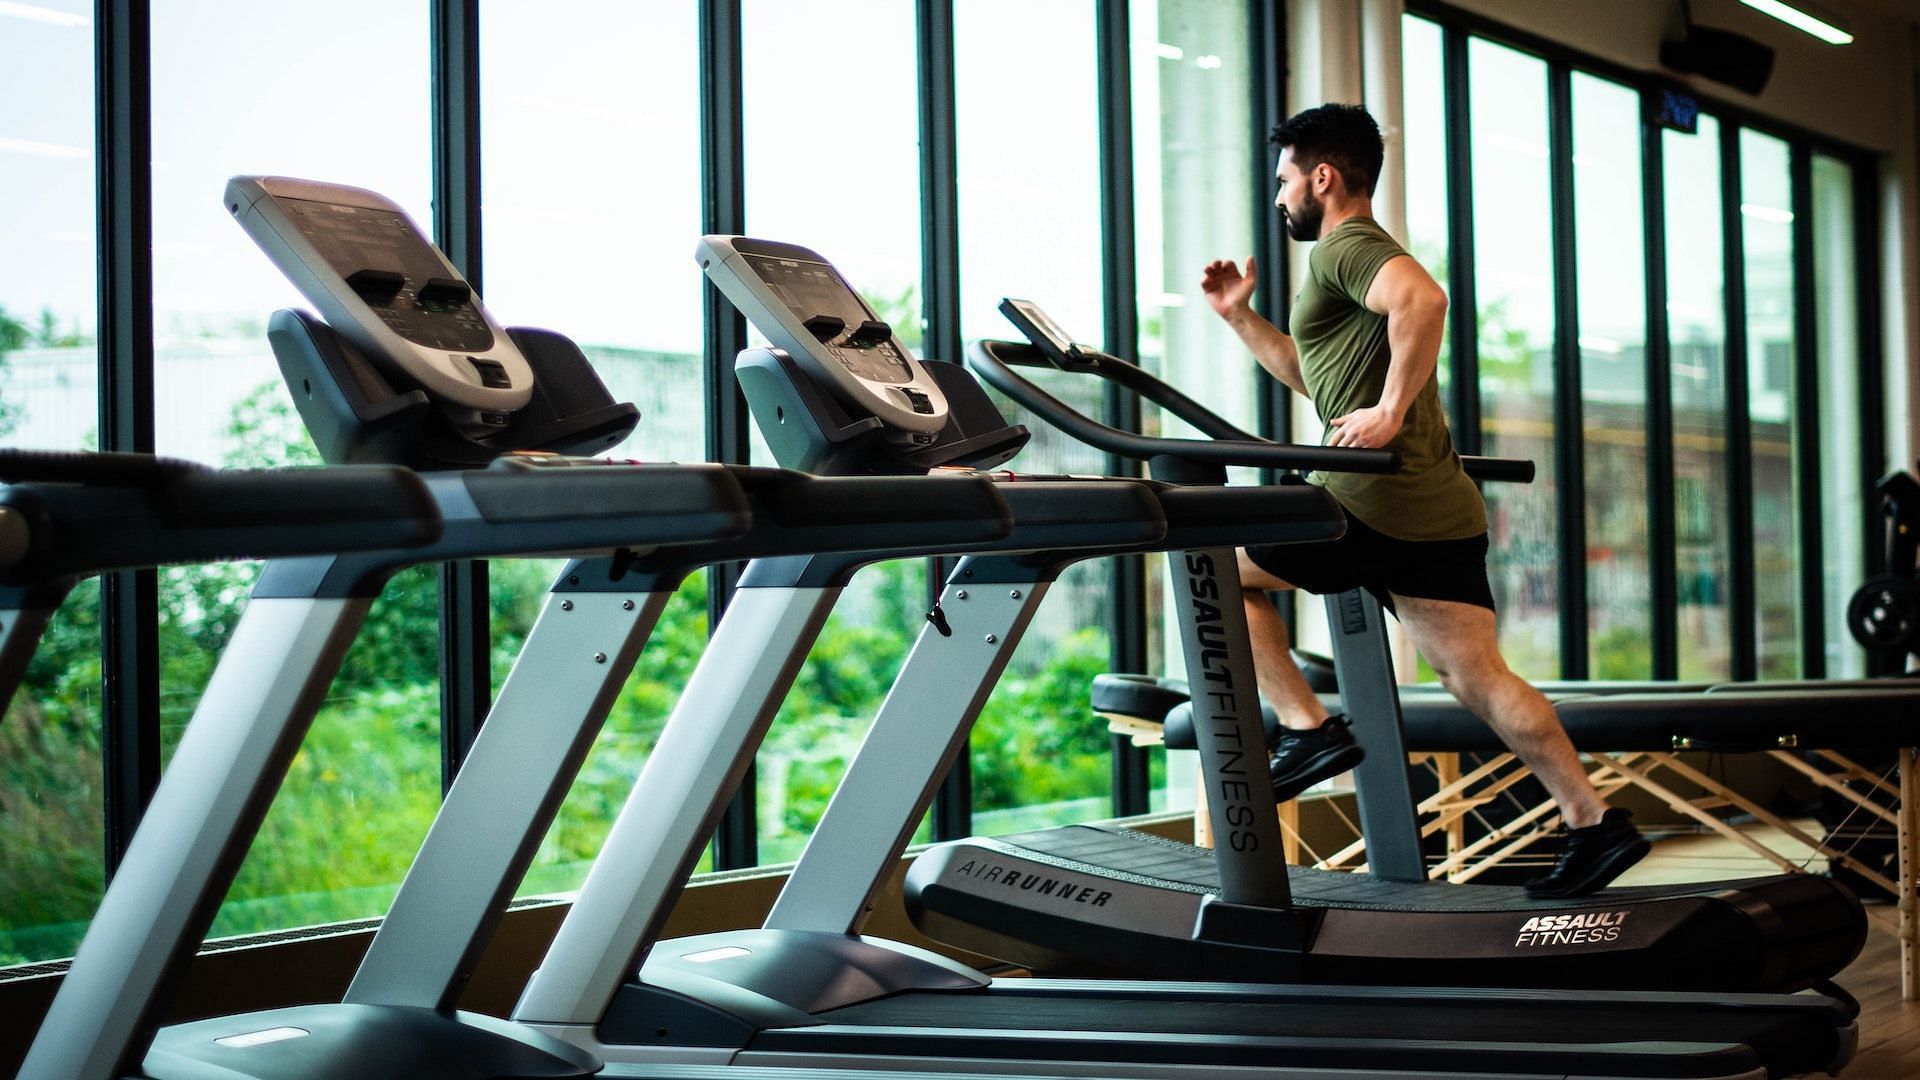 Is it better to run on a treadmill, or outdoors? Image via Pexels/William Choquette